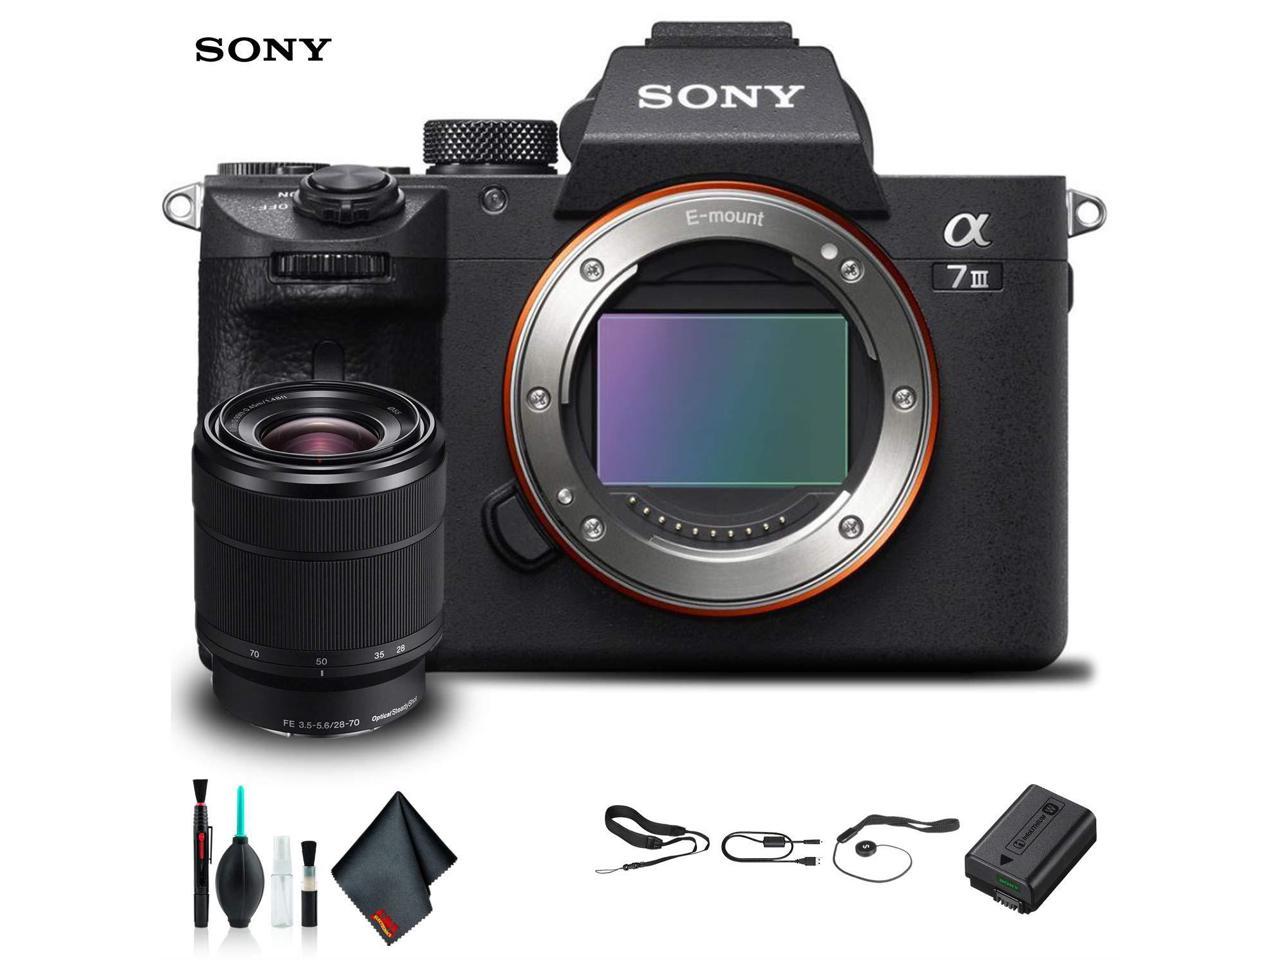 Sony Alpha a7 III Mirrorless Camera with 28-70mm Lens ILCE7M3K/B Starter Kit